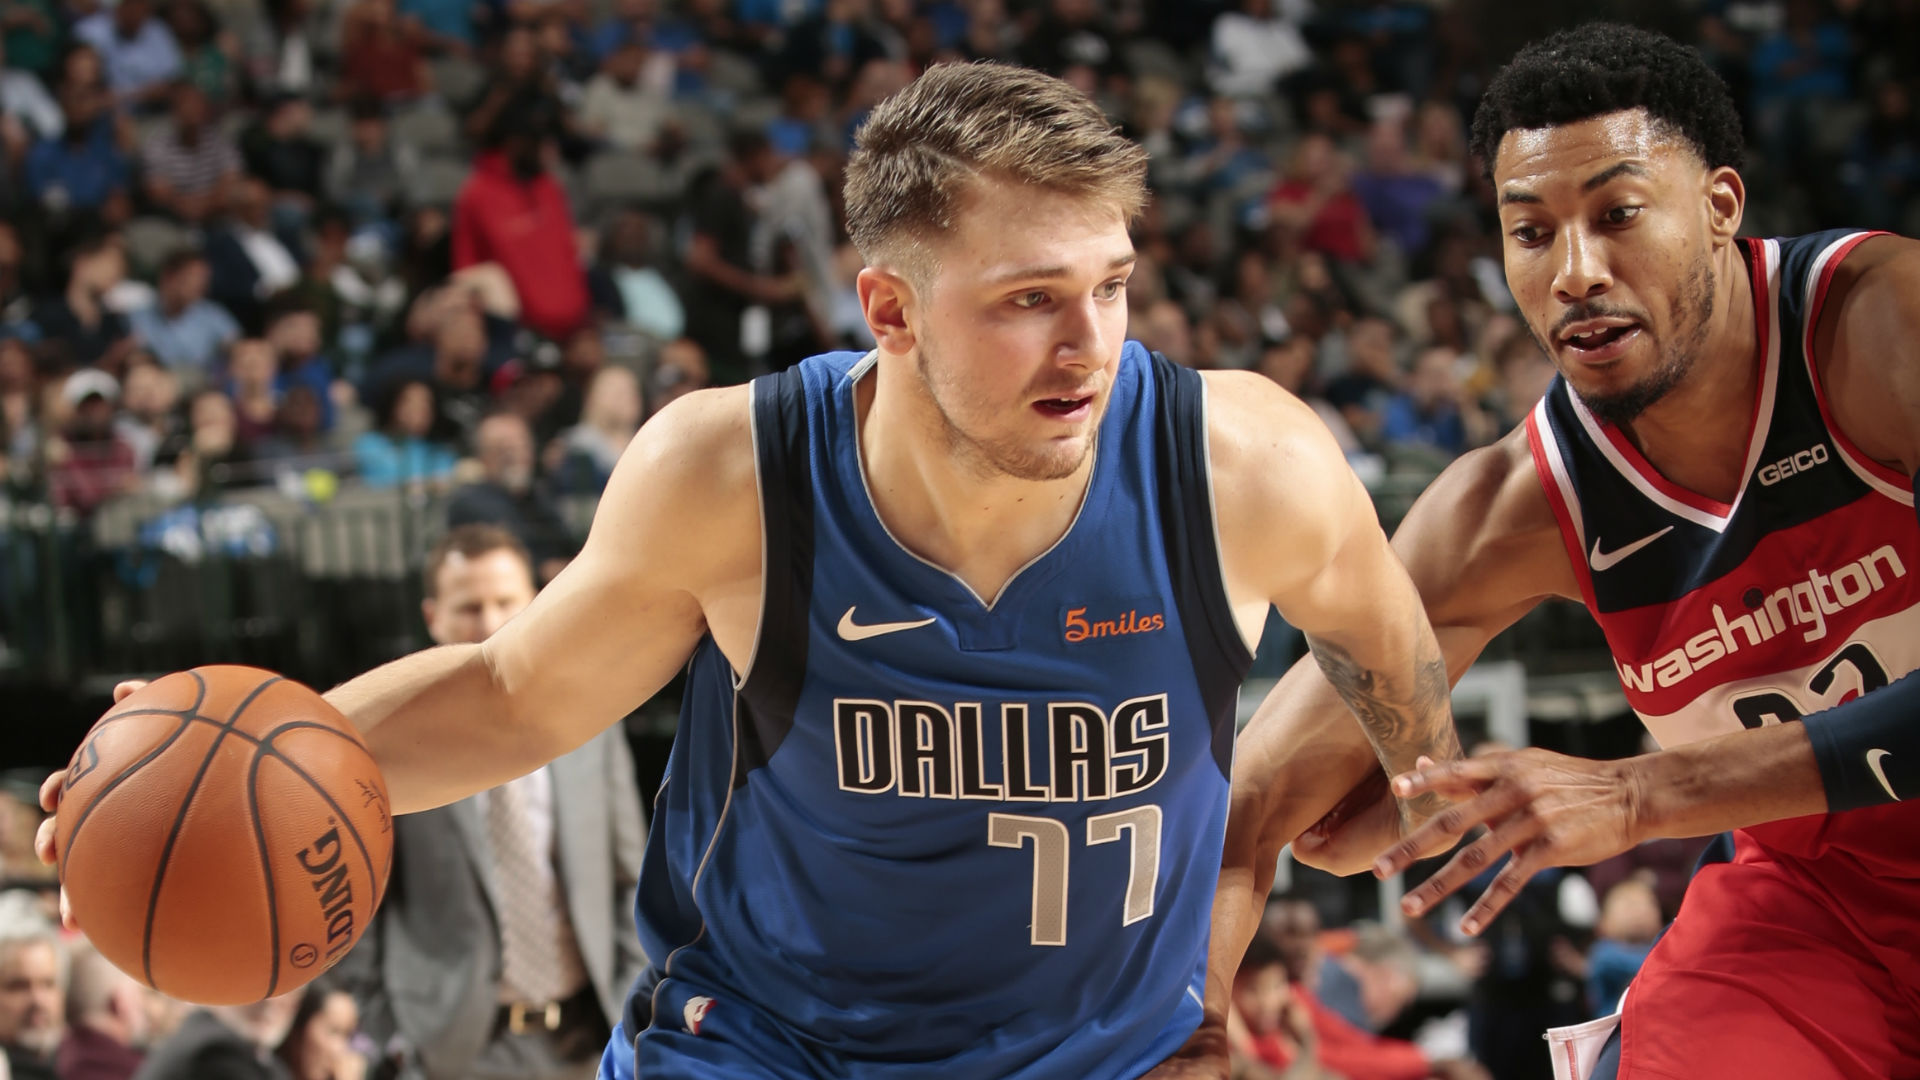 Heat Check: Does Luka Doncic deserve to be in the 2019 NBA All-Star Game? | NBA.com ...